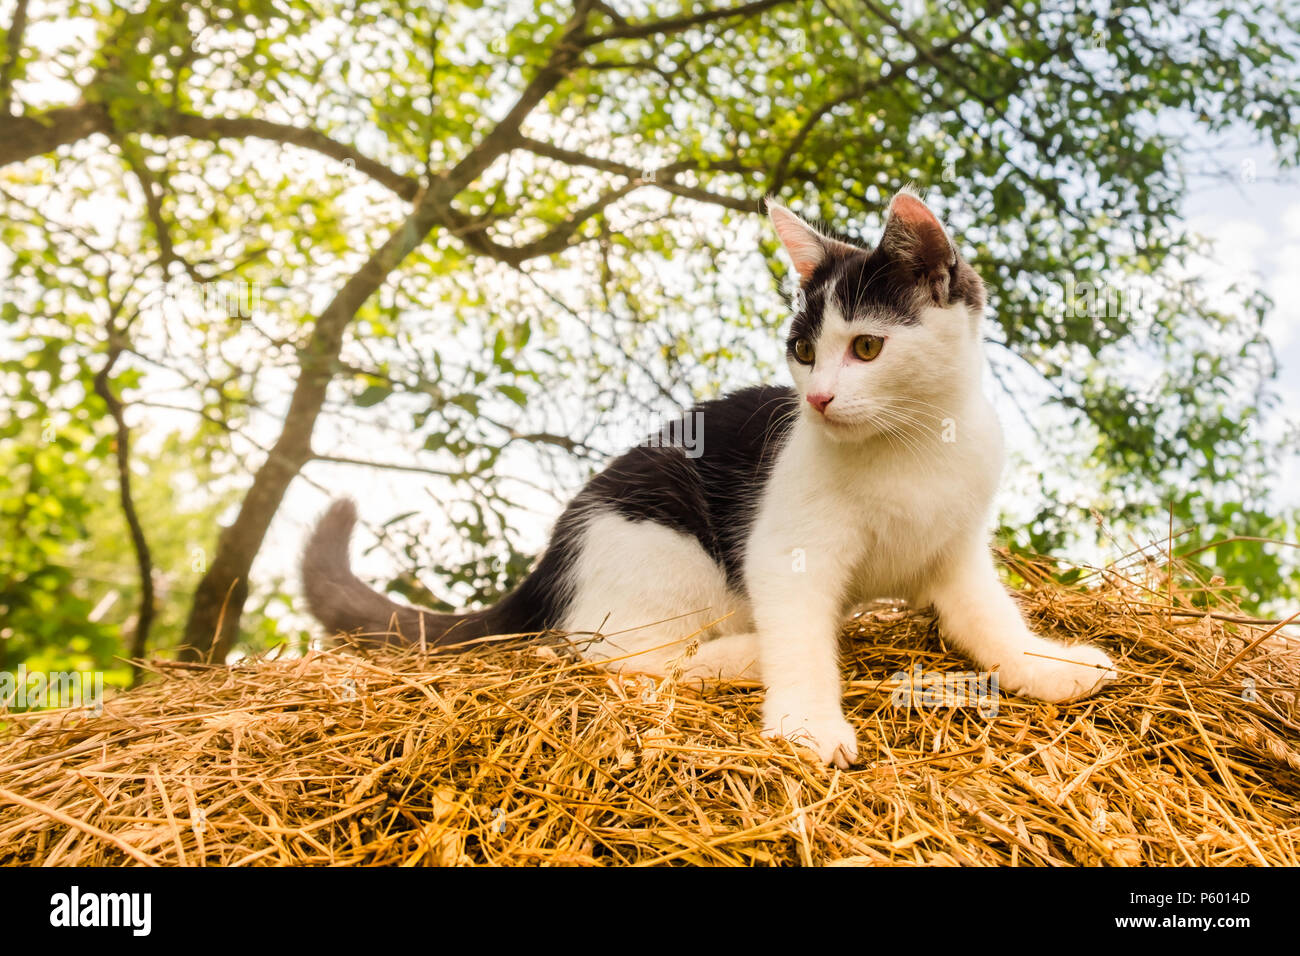 https://c8.alamy.com/comp/P6014D/young-black-white-spotted-cat-standing-on-dry-straw-bale-healthy-active-curious-domestic-pet-playing-outdoor-cute-kitten-in-country-garden-P6014D.jpg